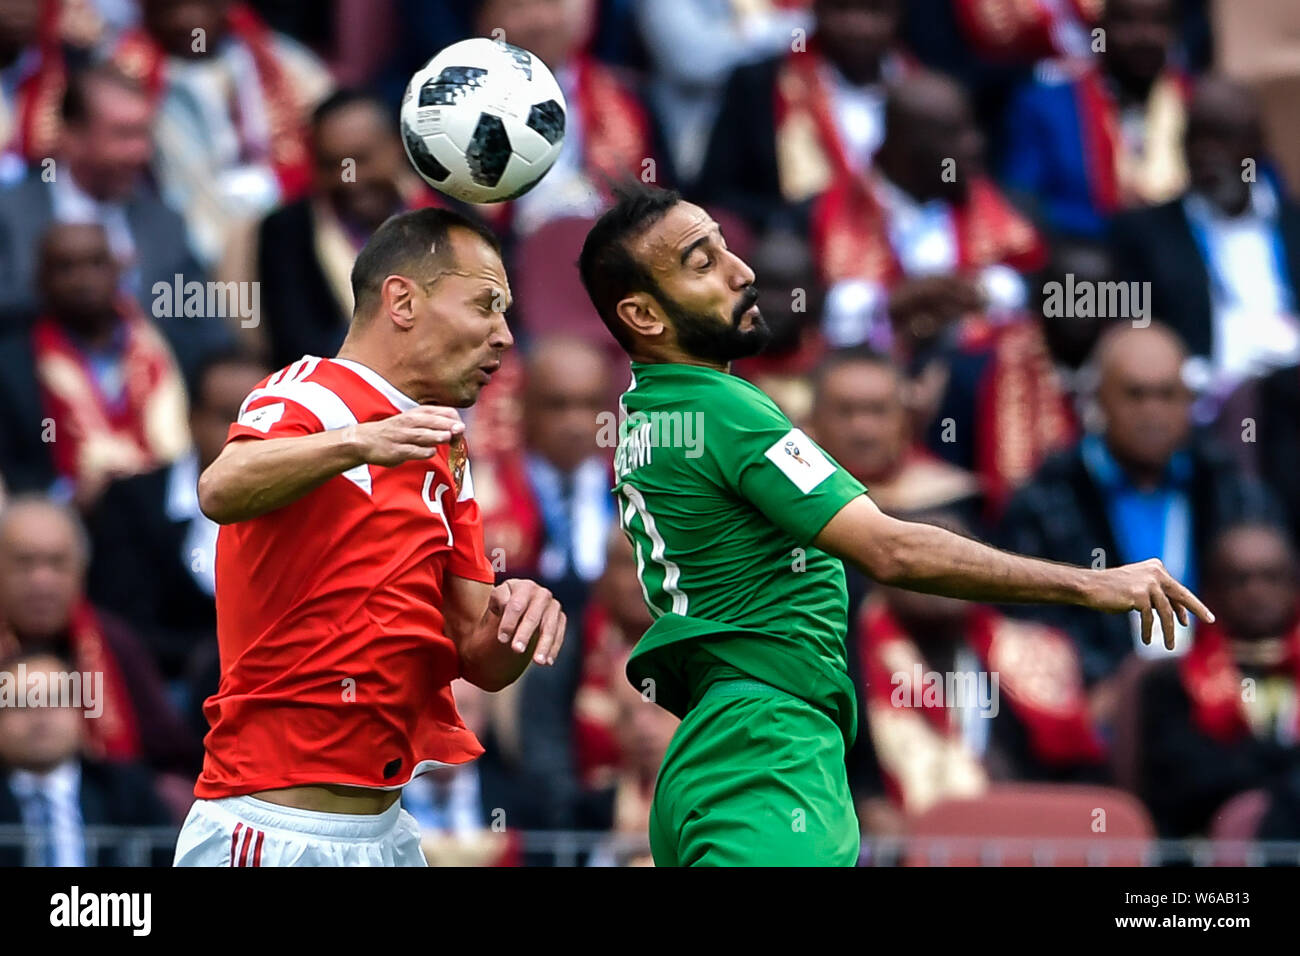 A player of Russia, left, challenges Mohammad Al-Sahlawi of Saudi Arabia in their Group A match during the 2018 FIFA World Cup in Moscow, Russia, 14 J Stock Photo